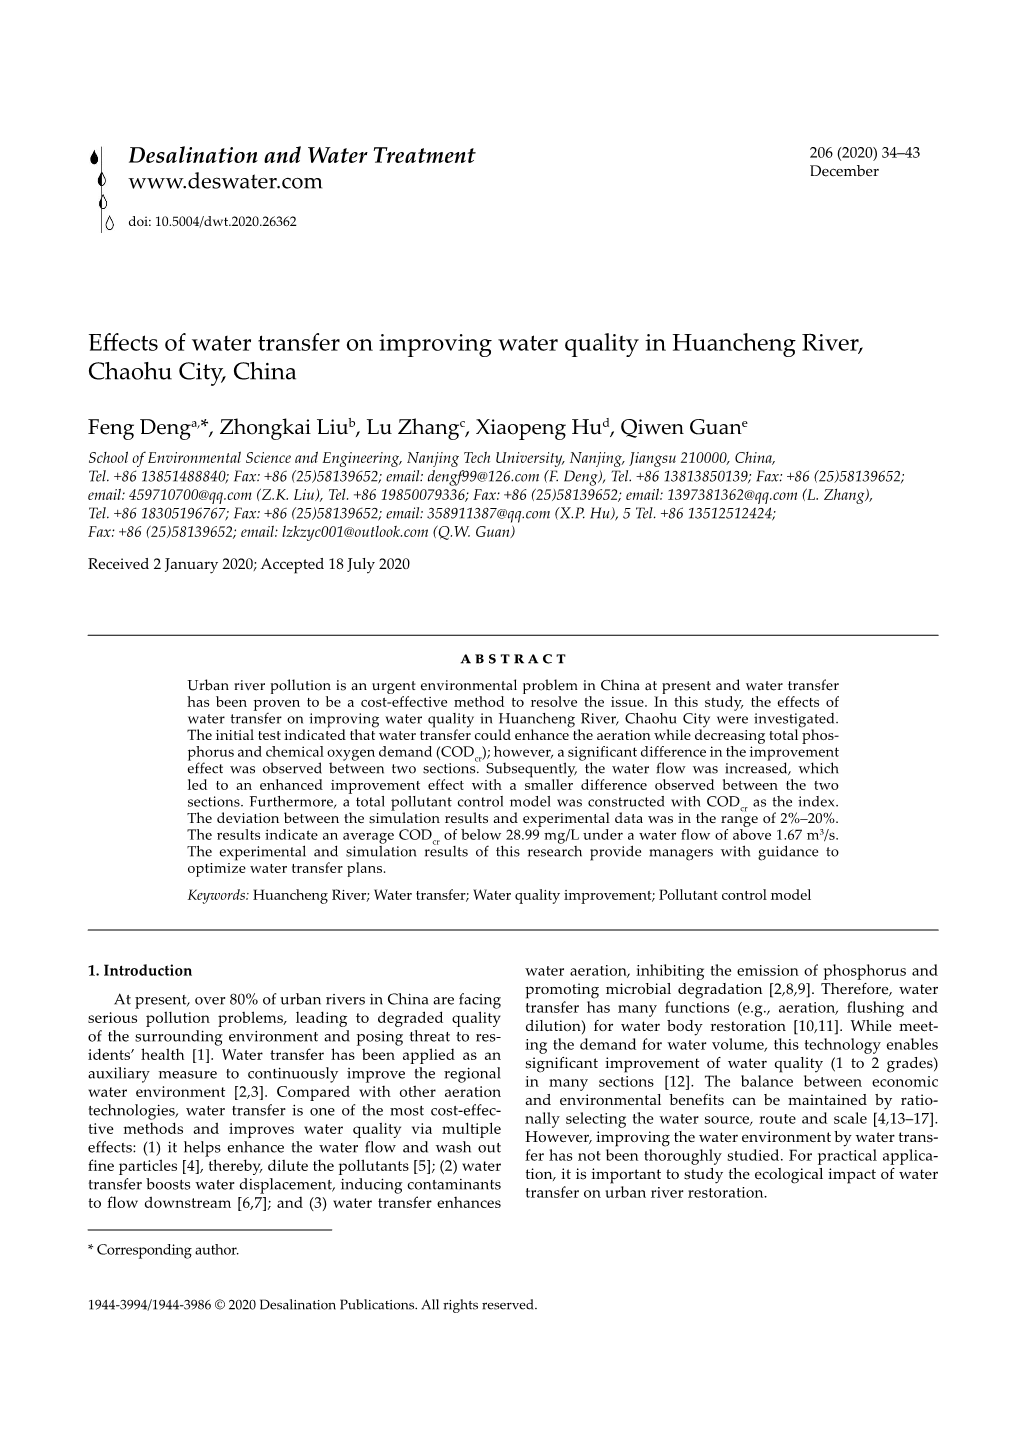 Effects of Water Transfer on Improving Water Quality in Huancheng River, Chaohu City, China